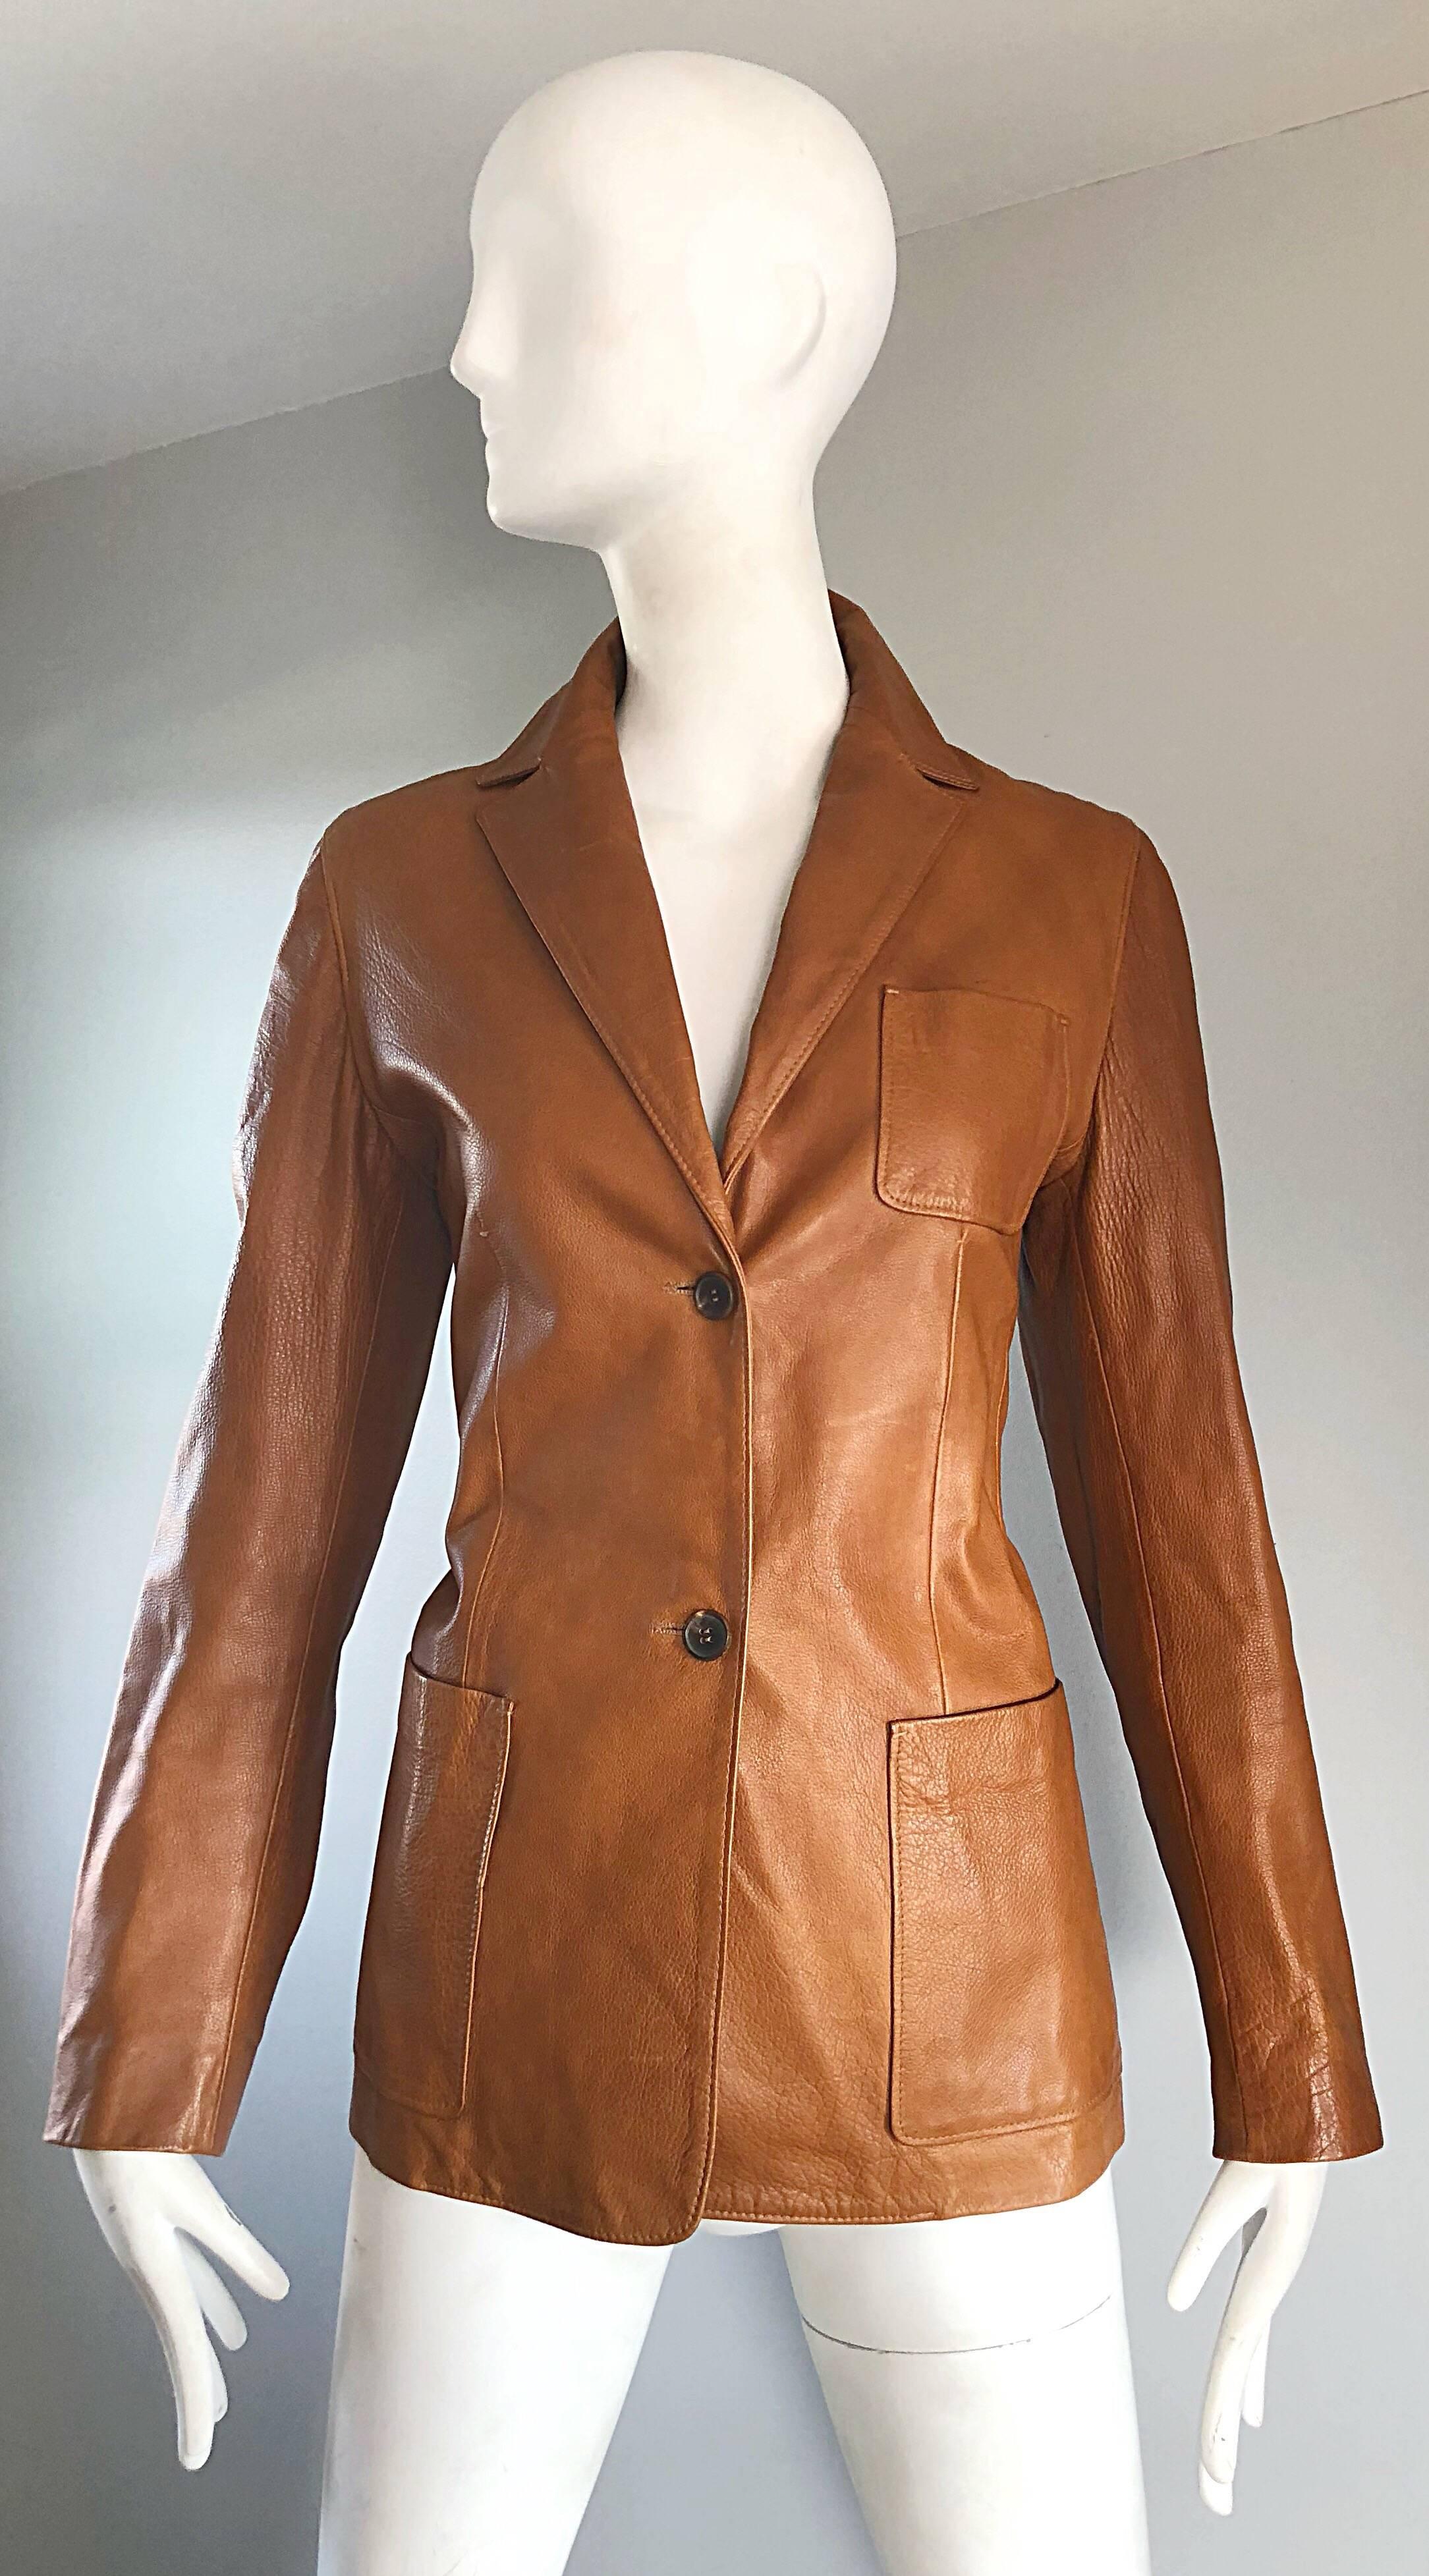 Classic, yet stylish 90s JIL SANDER camel / brown leather blazer jacket! Sharp tailored fit, with two buttons up the front. Pockets at each side of the waist, and at left breast. Fully lined. Looks fantastic on, buttoned or unbuttoned, with the